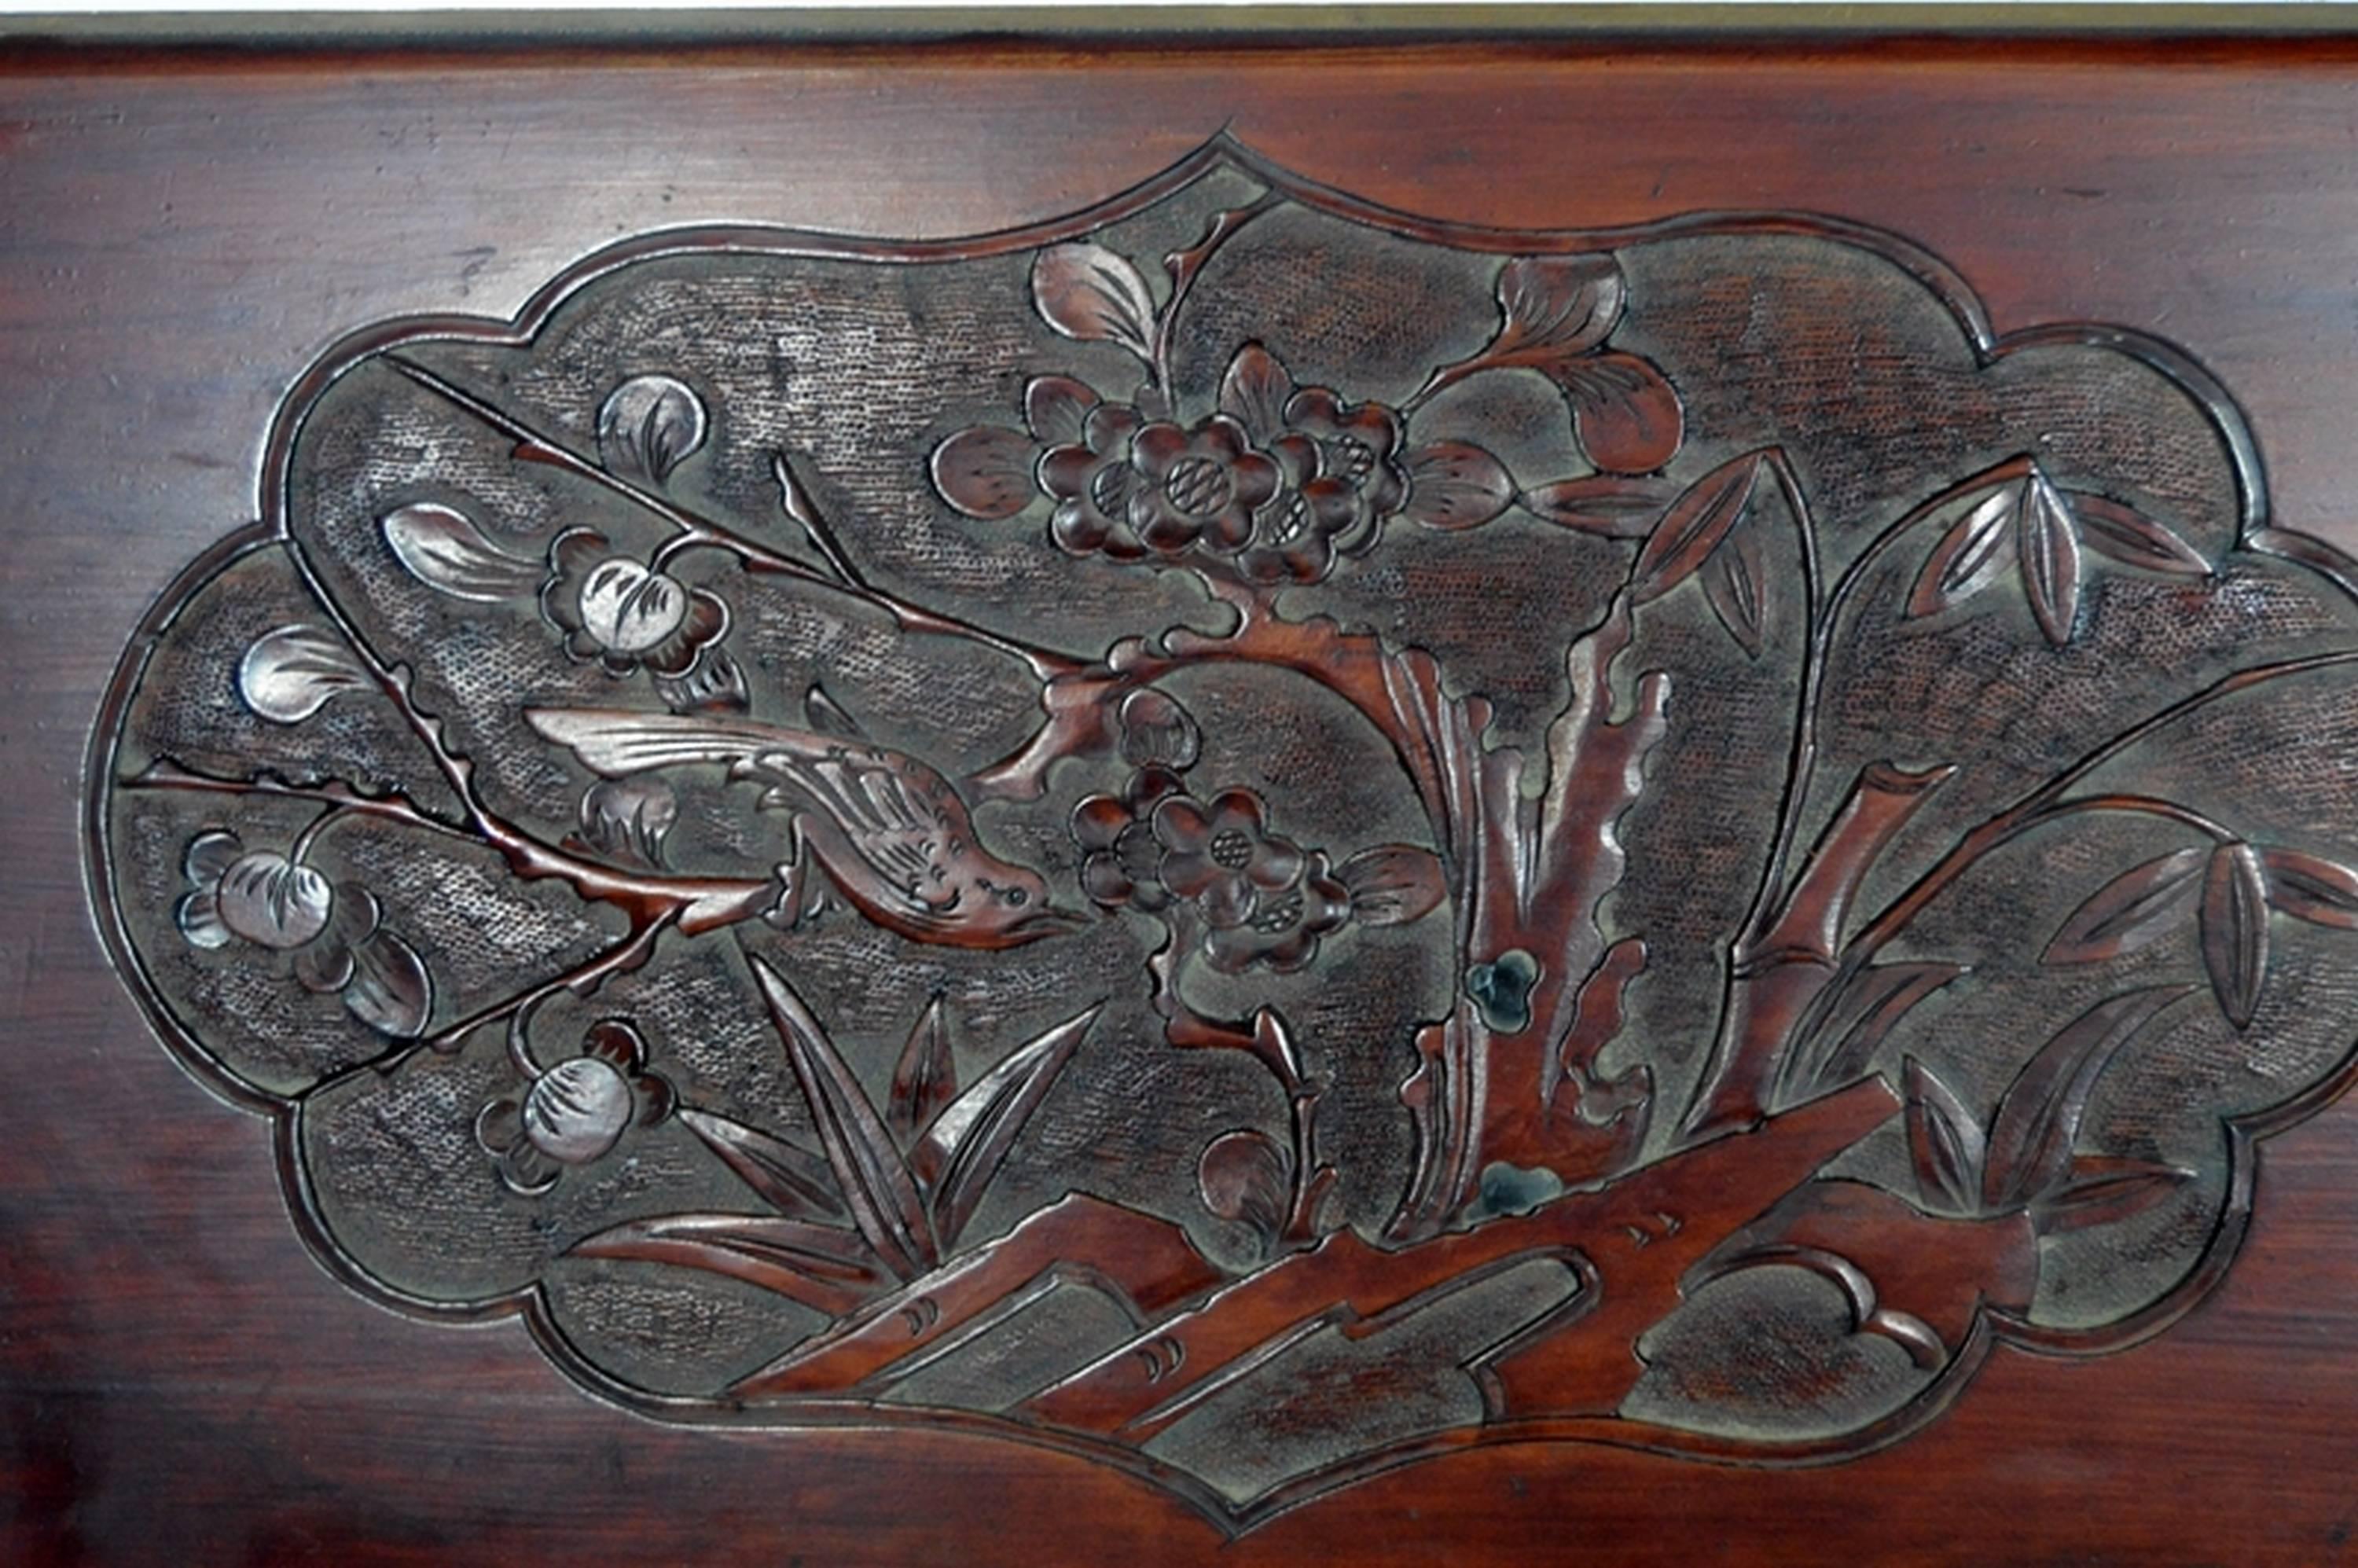 A 19th century Chinese wall plaque hand-carved in lacquered rosewood. This large rectangular wall plaque displays a lobed medallion on its centre. The hand carved frame showcases an enjoyable flower and bird scene, a common and auspicious pattern in